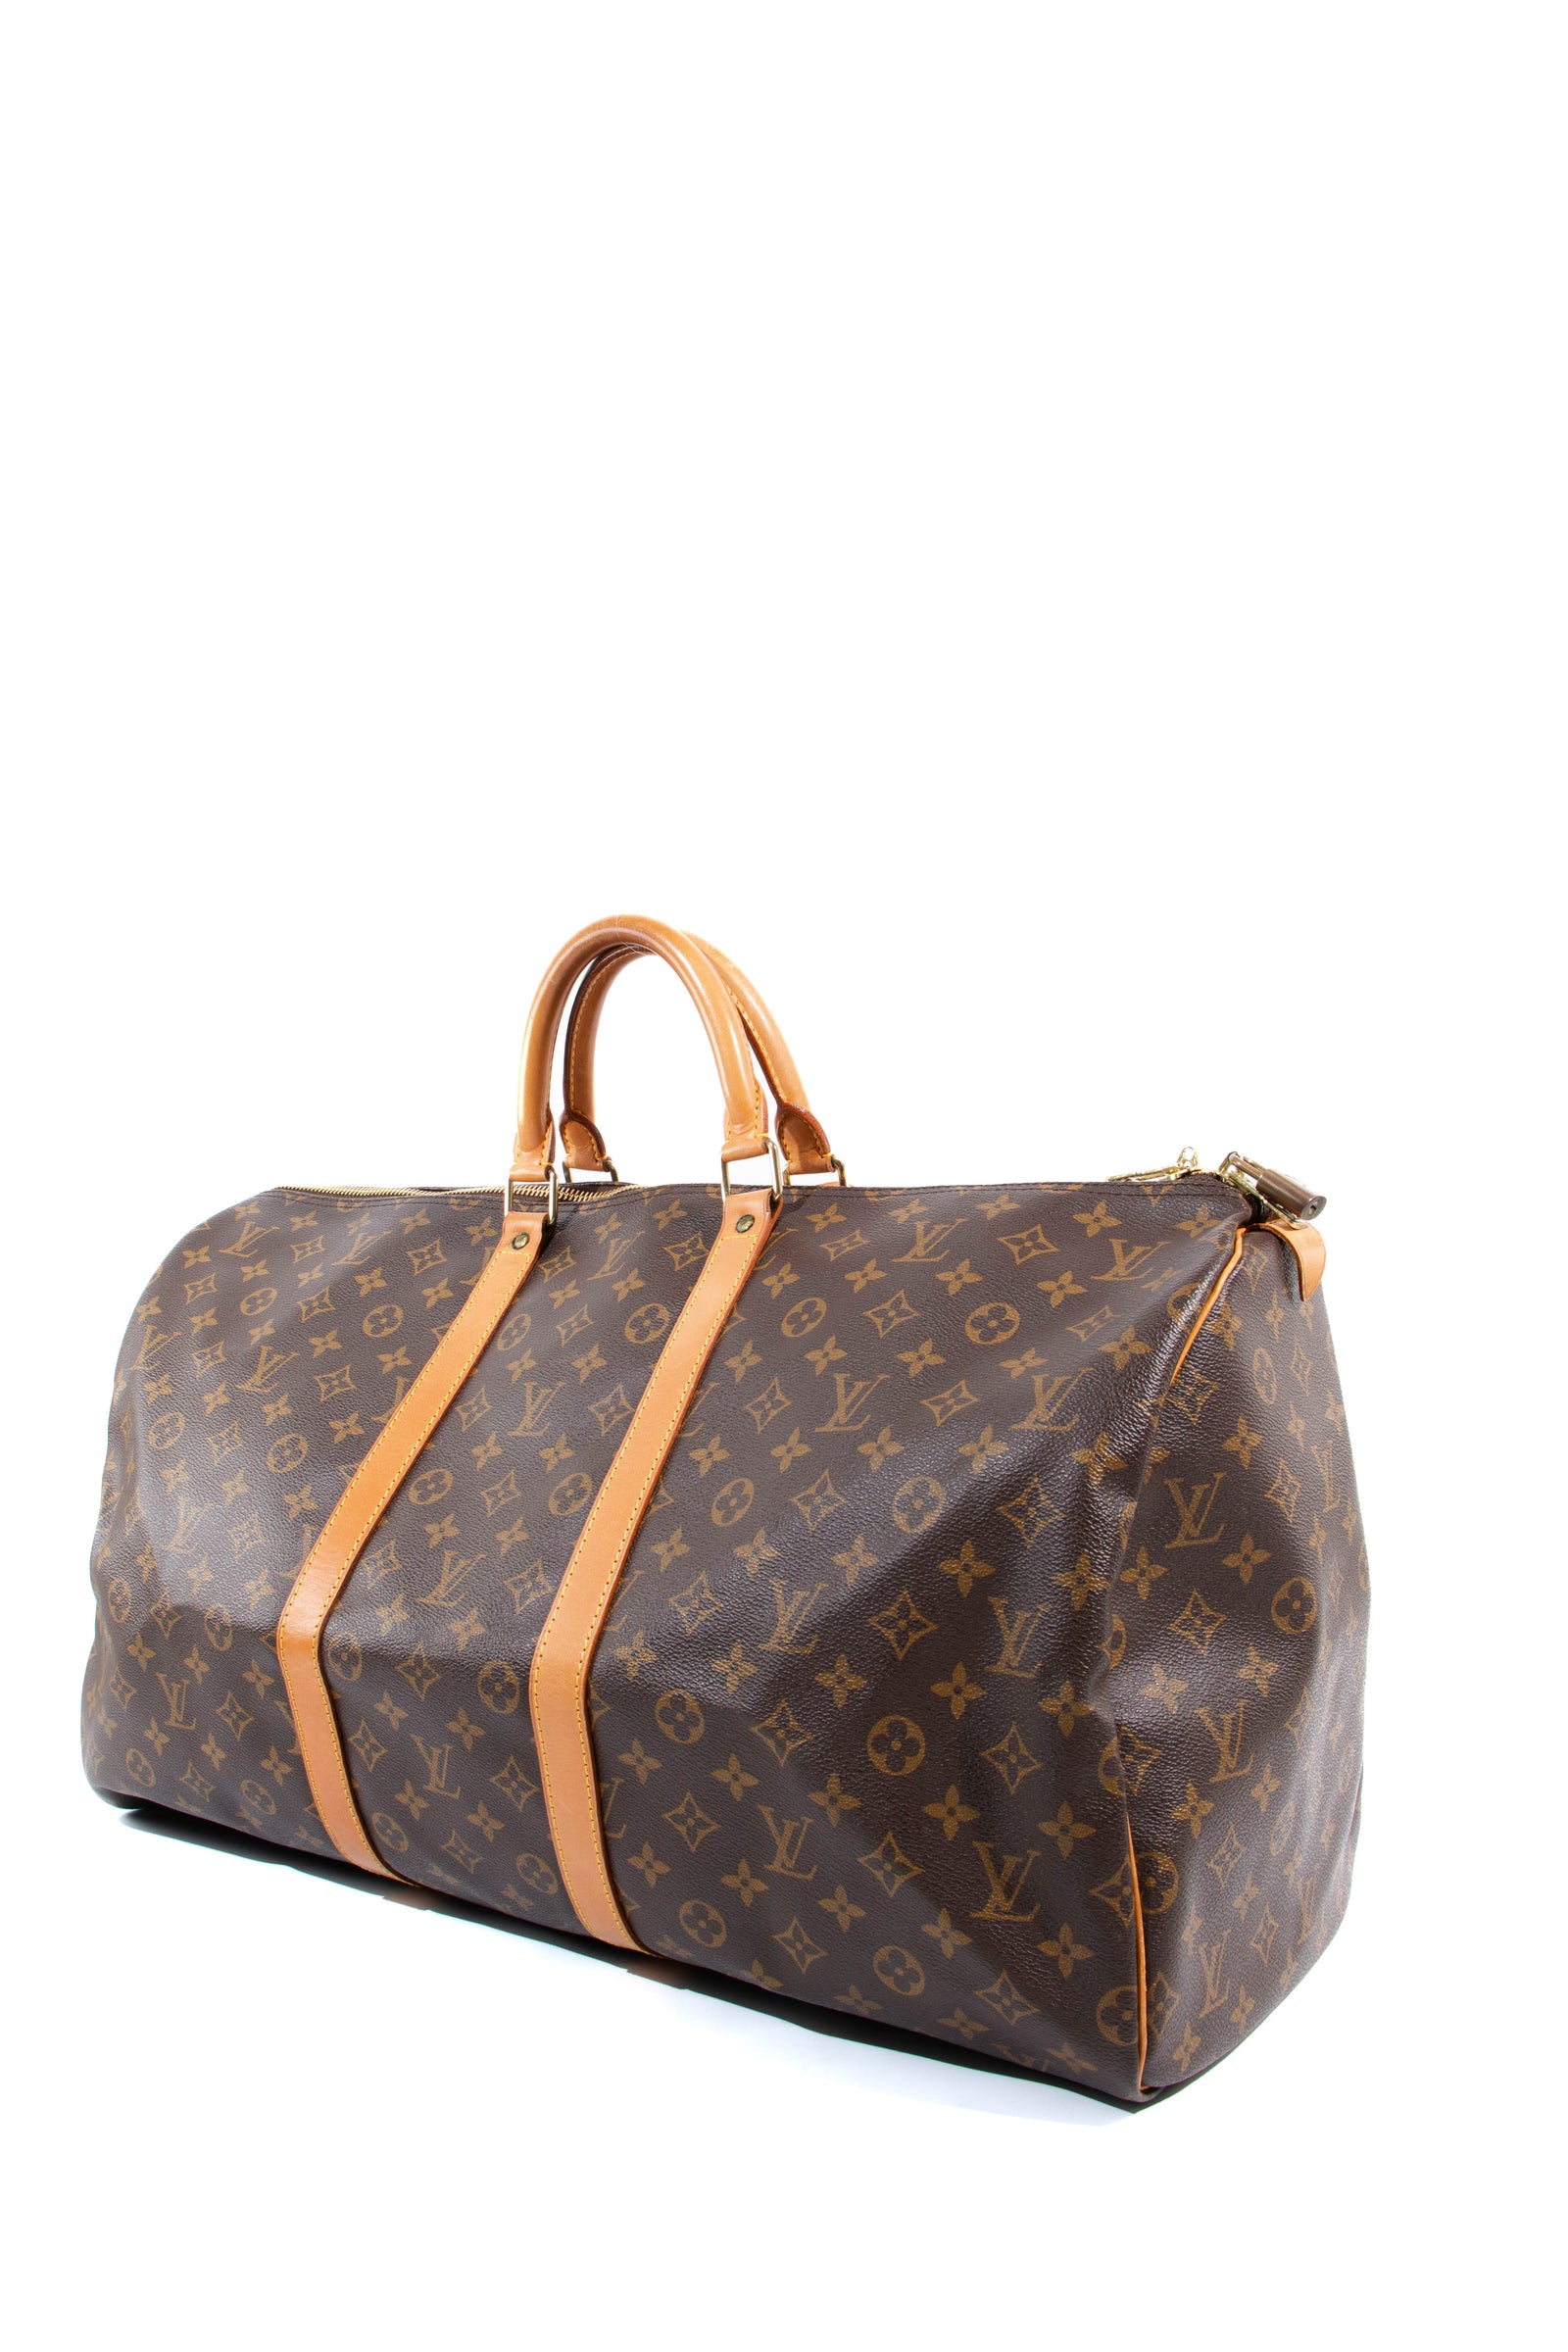 LOUIS VUITTON x Chapman Brothers, Keepall Bandouliere, Monogram Savane Ink  55 Midnight. Vintage Clothing & Accessories - Auctionet